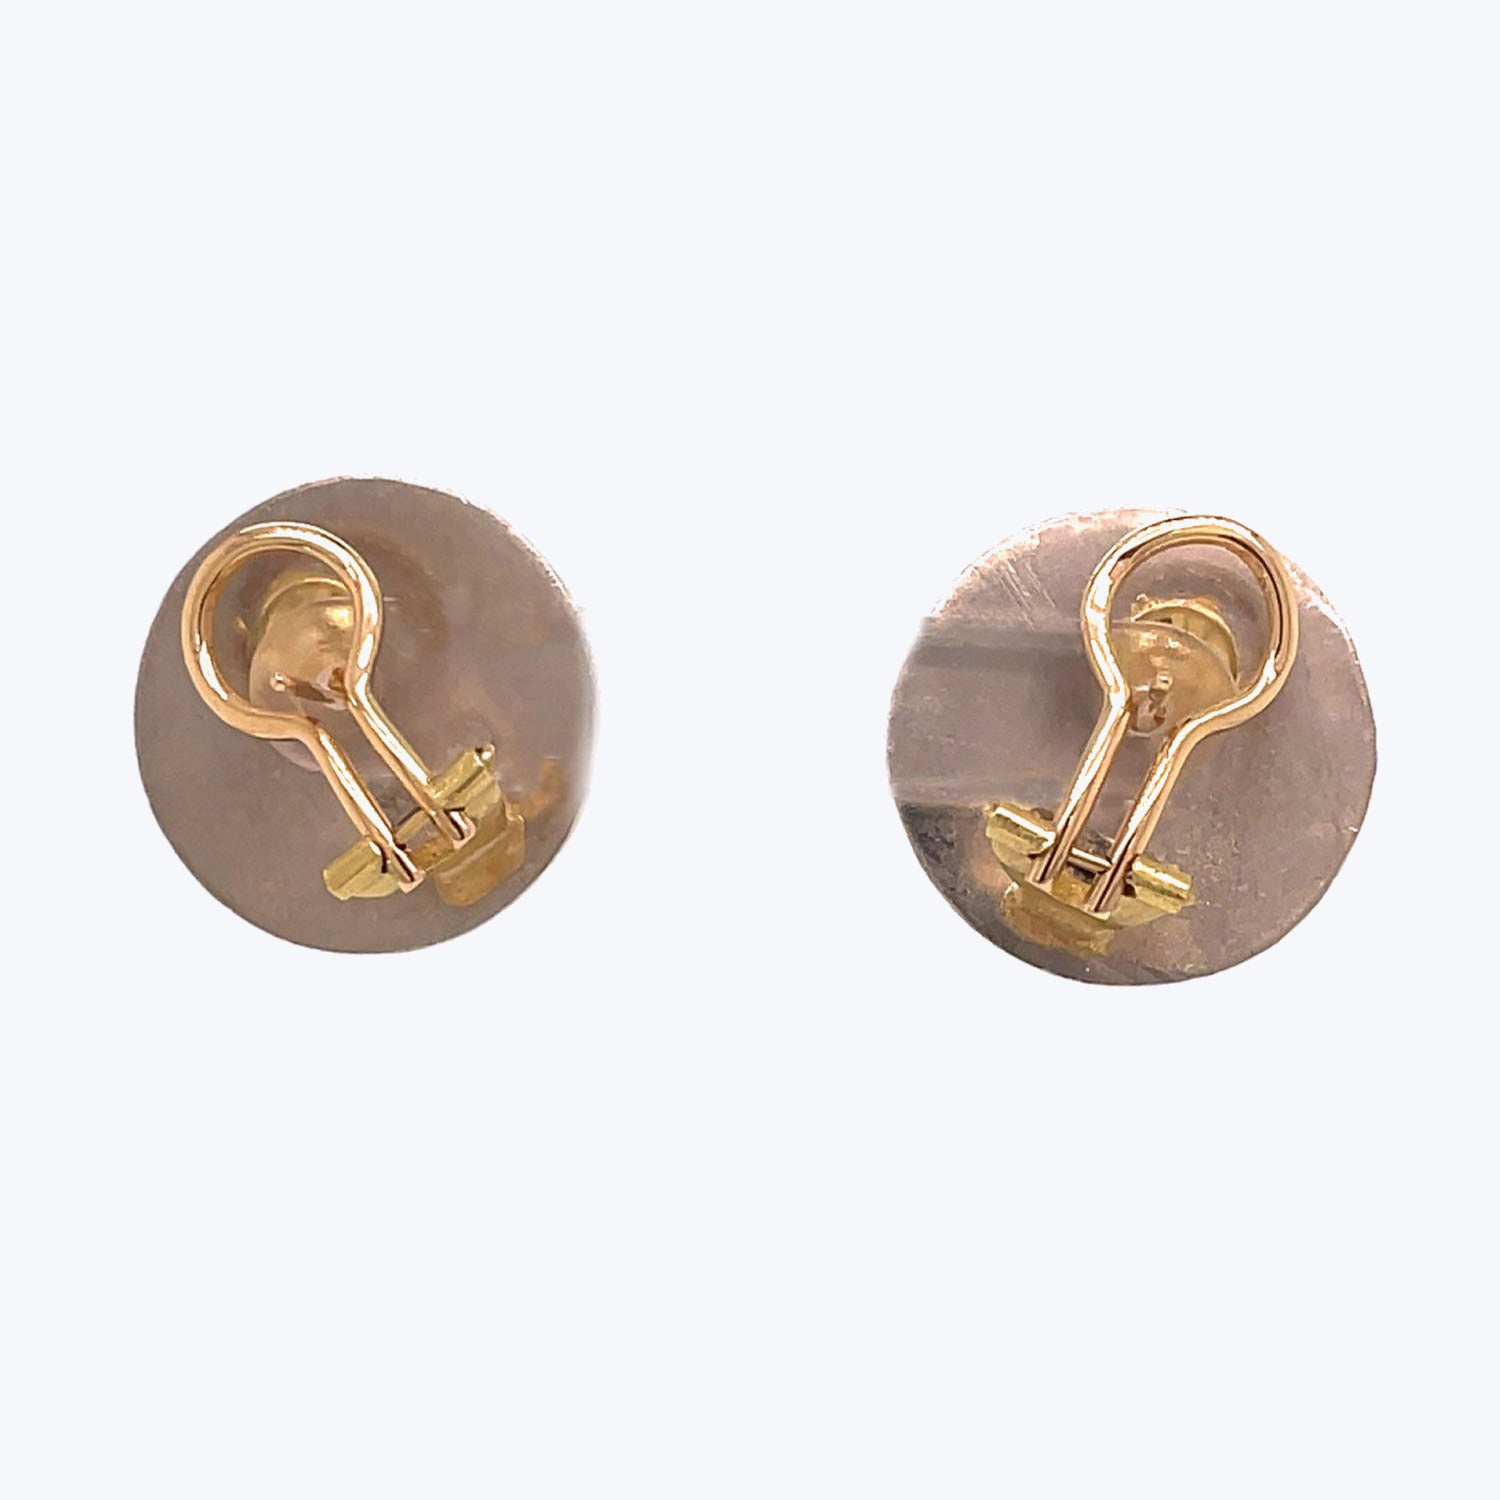 Two golden lapel pins featuring embossed light bulb designs.